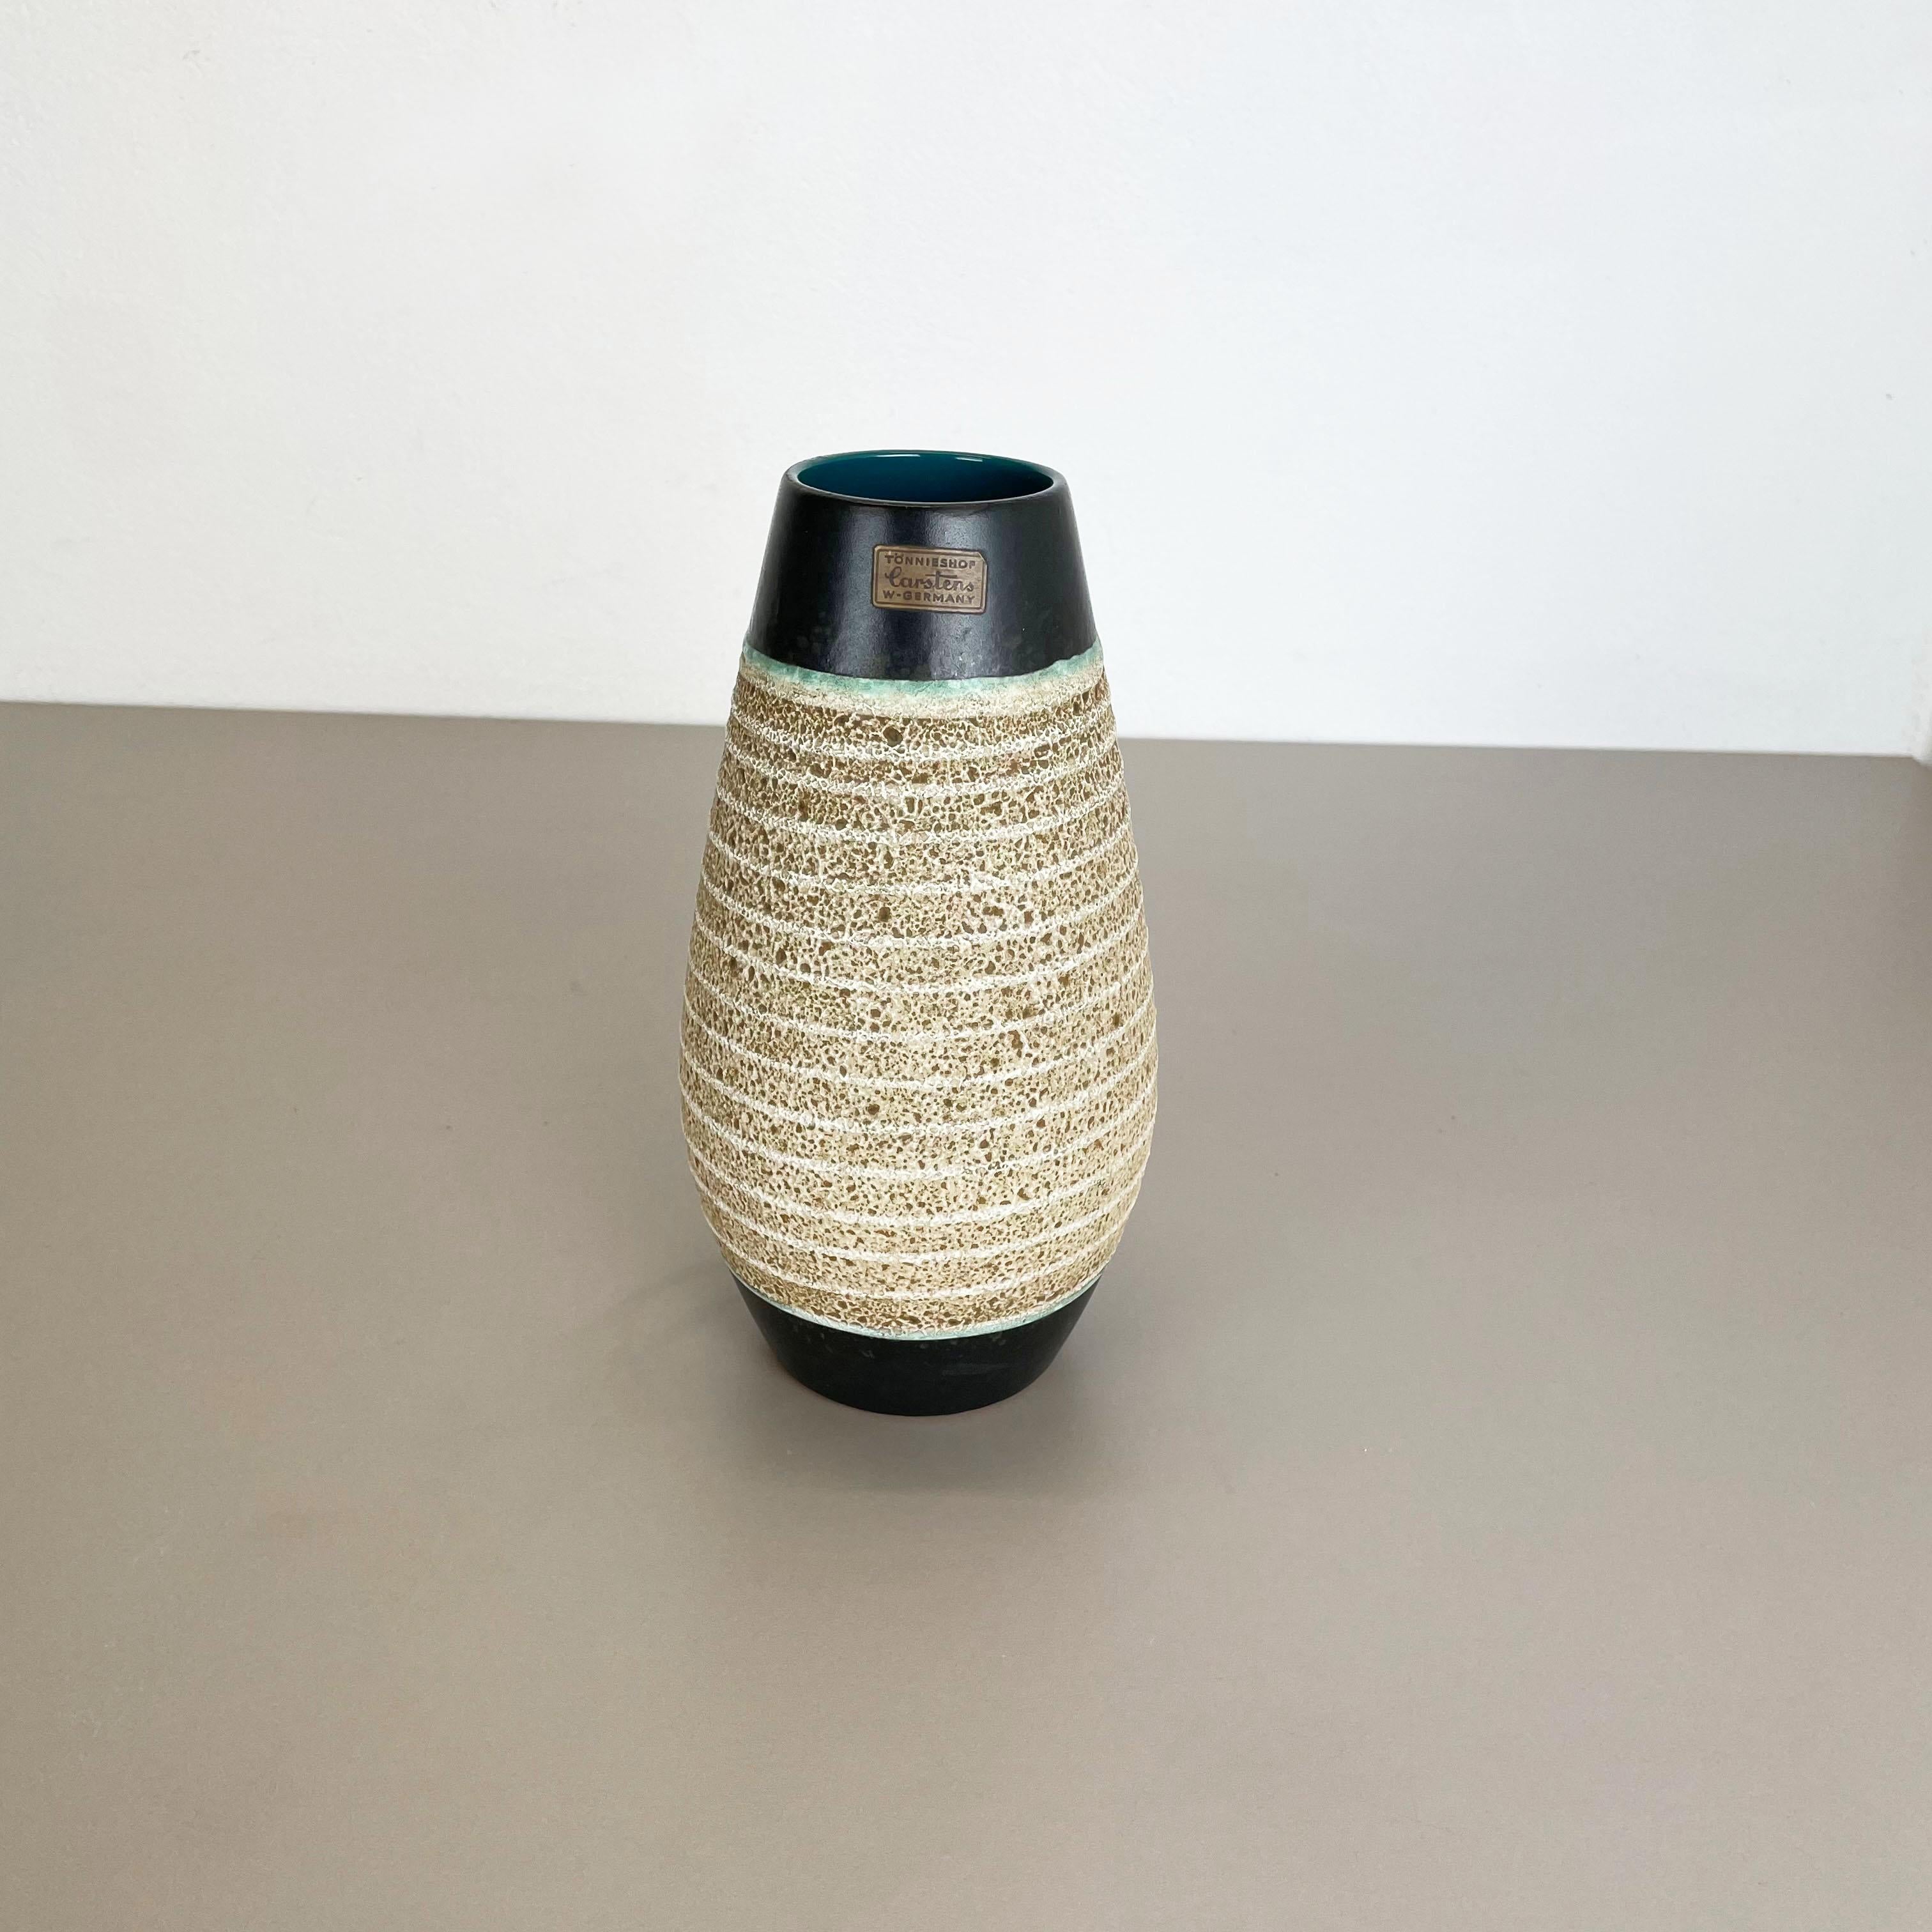 Article:

Ceramic pottery vase


Origin:

Germany


Designer:

Heinz Siery


Producer:

Carstens Tönnieshof, Germany


Decade:

1960s


This original vintage Pottery Object was designed by Heinz Siery and produced by Cartens